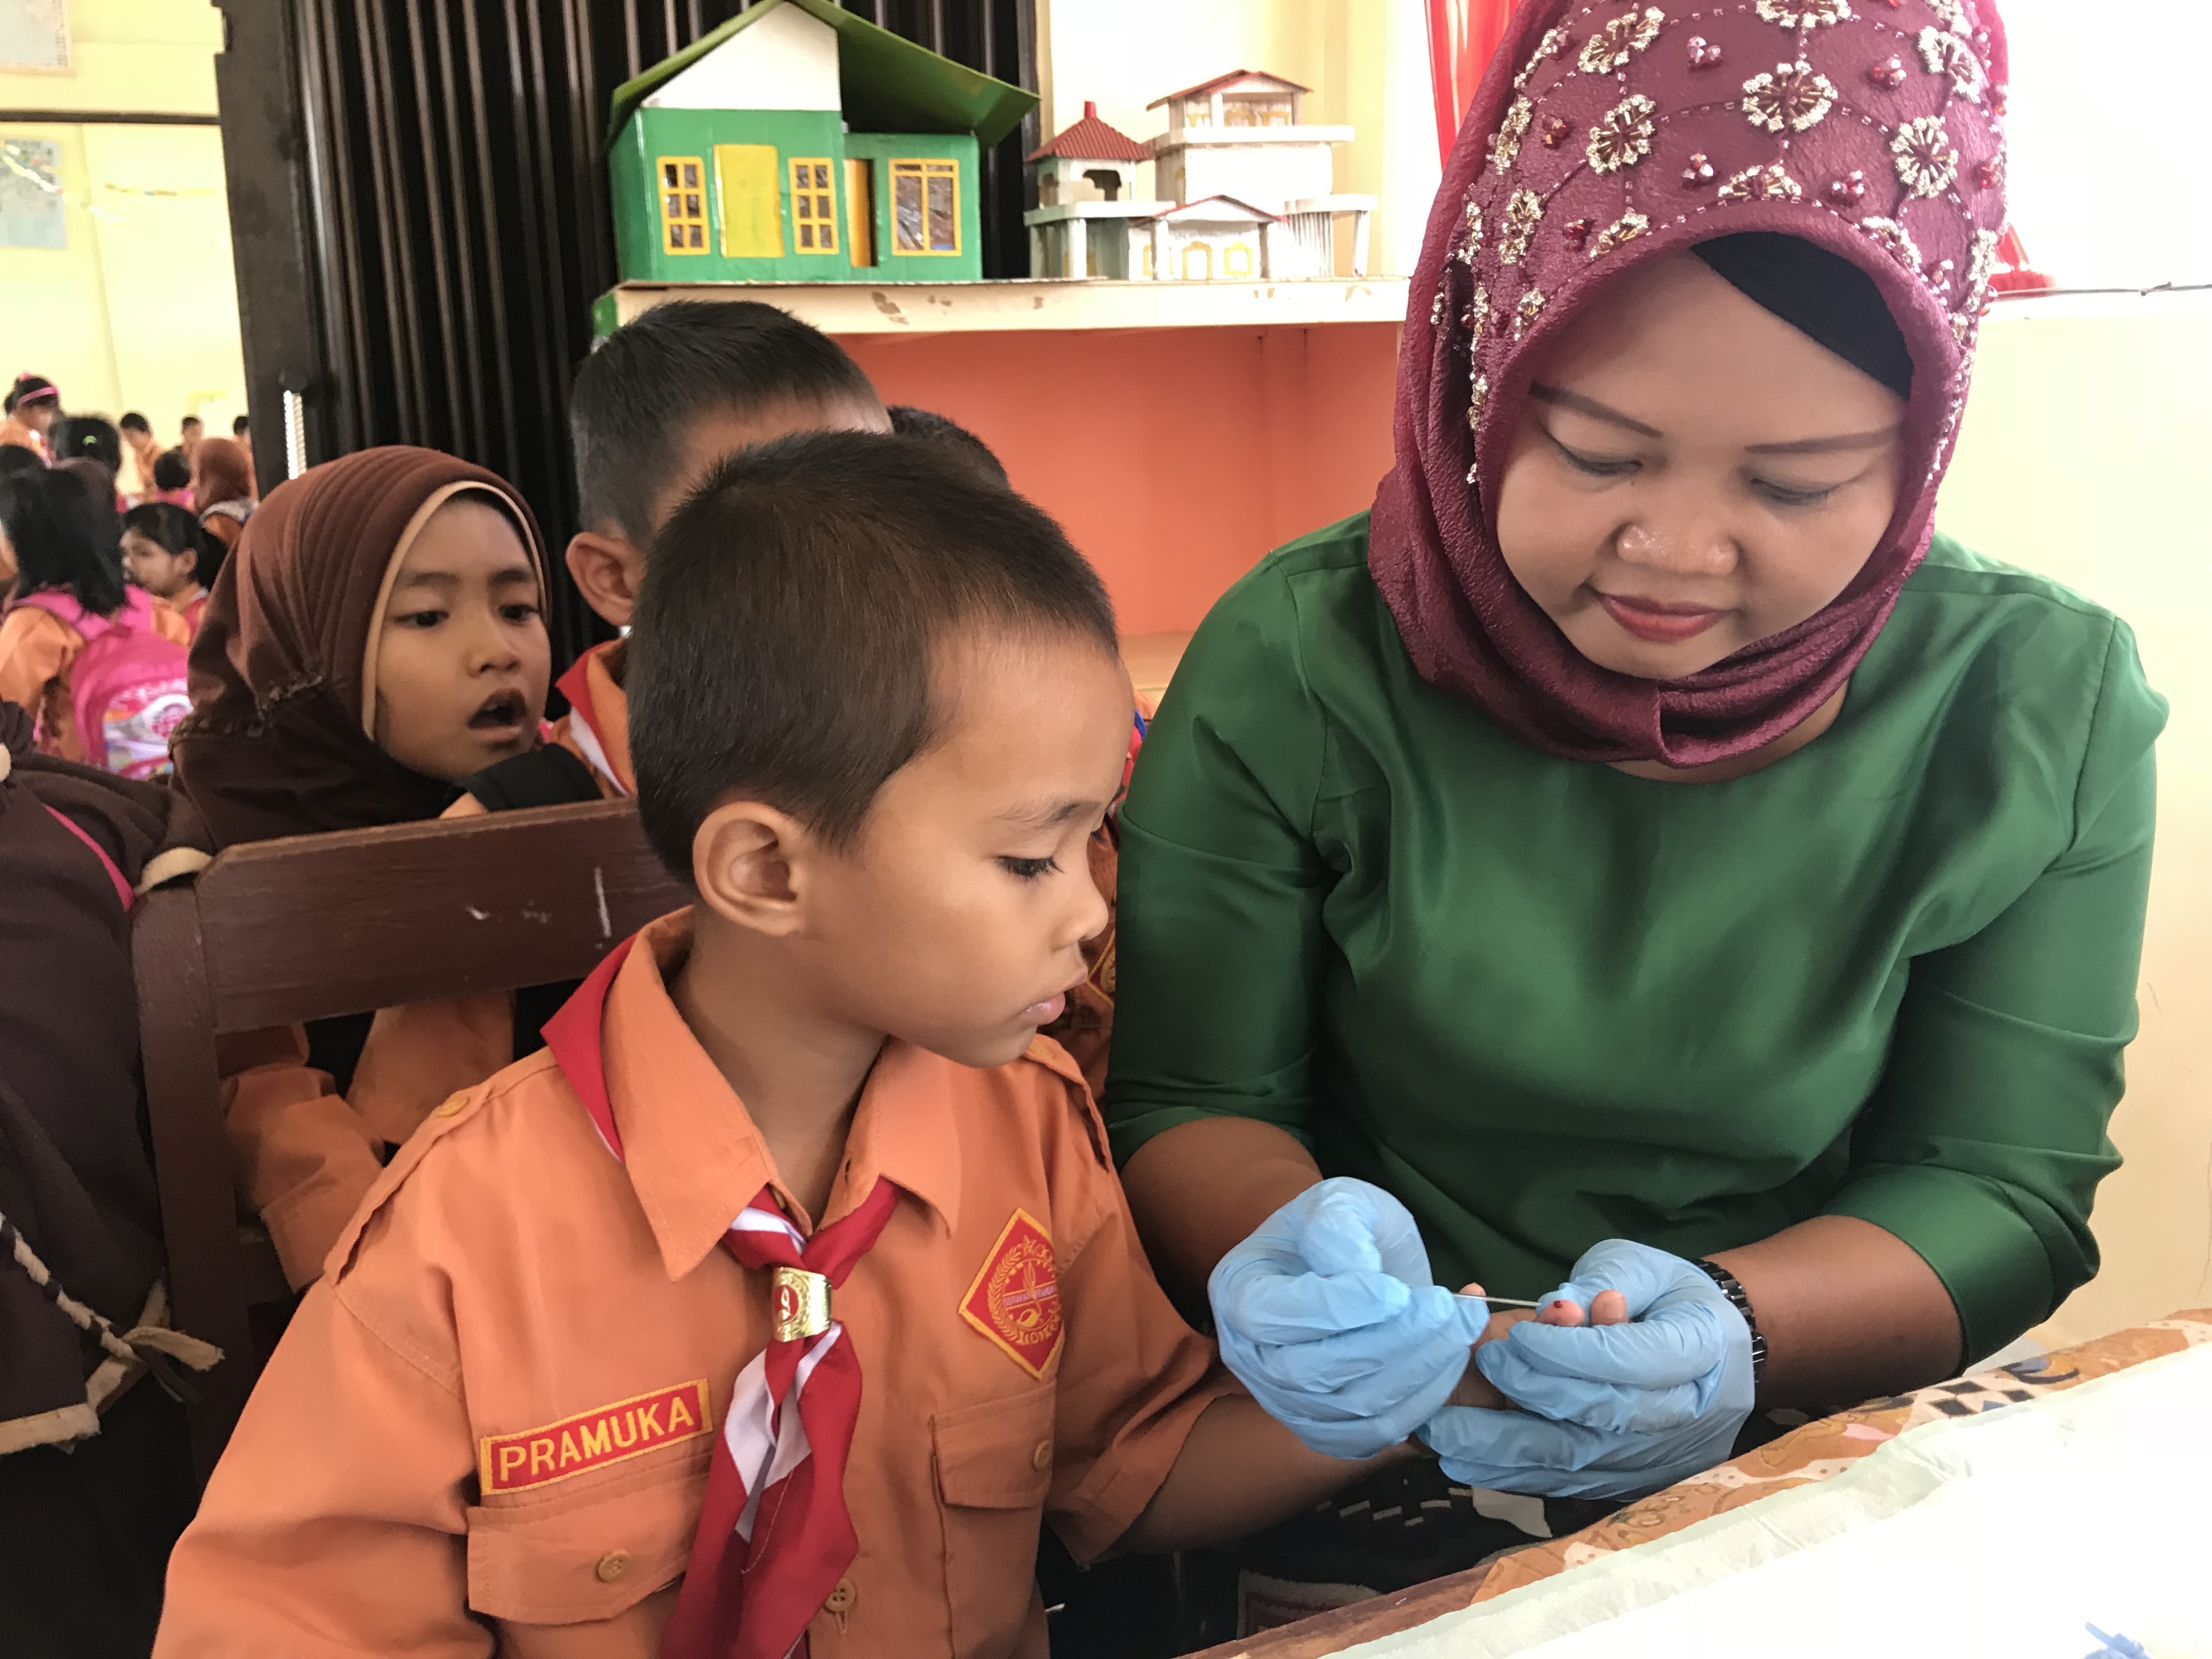 A young boy has his finger pricked during a transmission assessment survey in Indonesia. Photo credit: RTI International